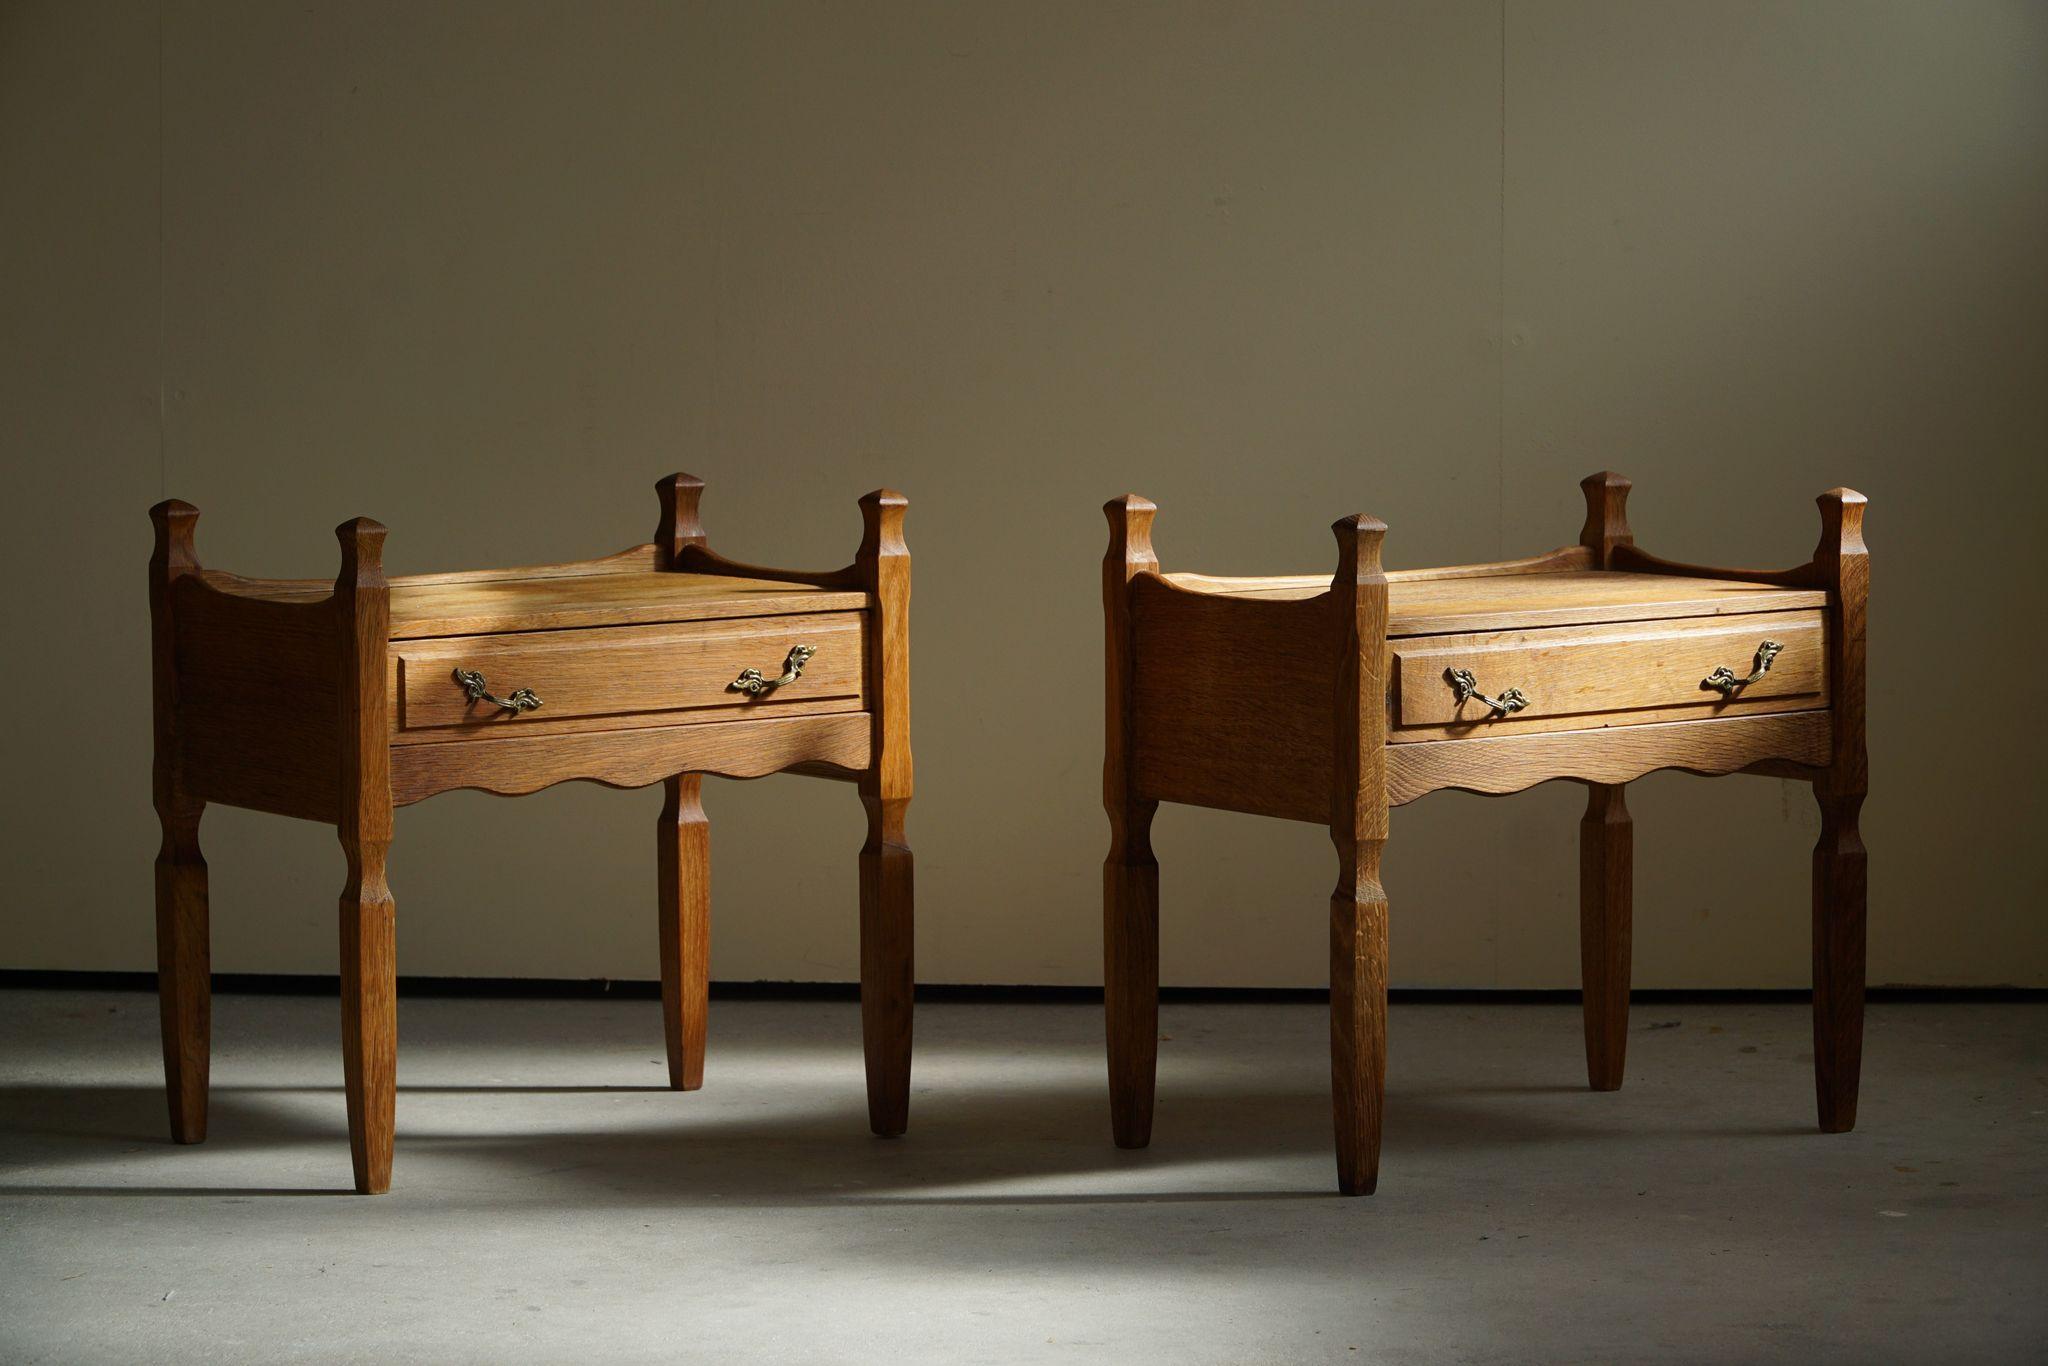 A gorgeous pair of night stands / chest of drawers in oak. Designed by Henning Kjærnulf in 1960s. Made by EG Møbler. A rare sculptural set that combine baroque style and modernism. 

This pair will complement many interior styles. A modern,